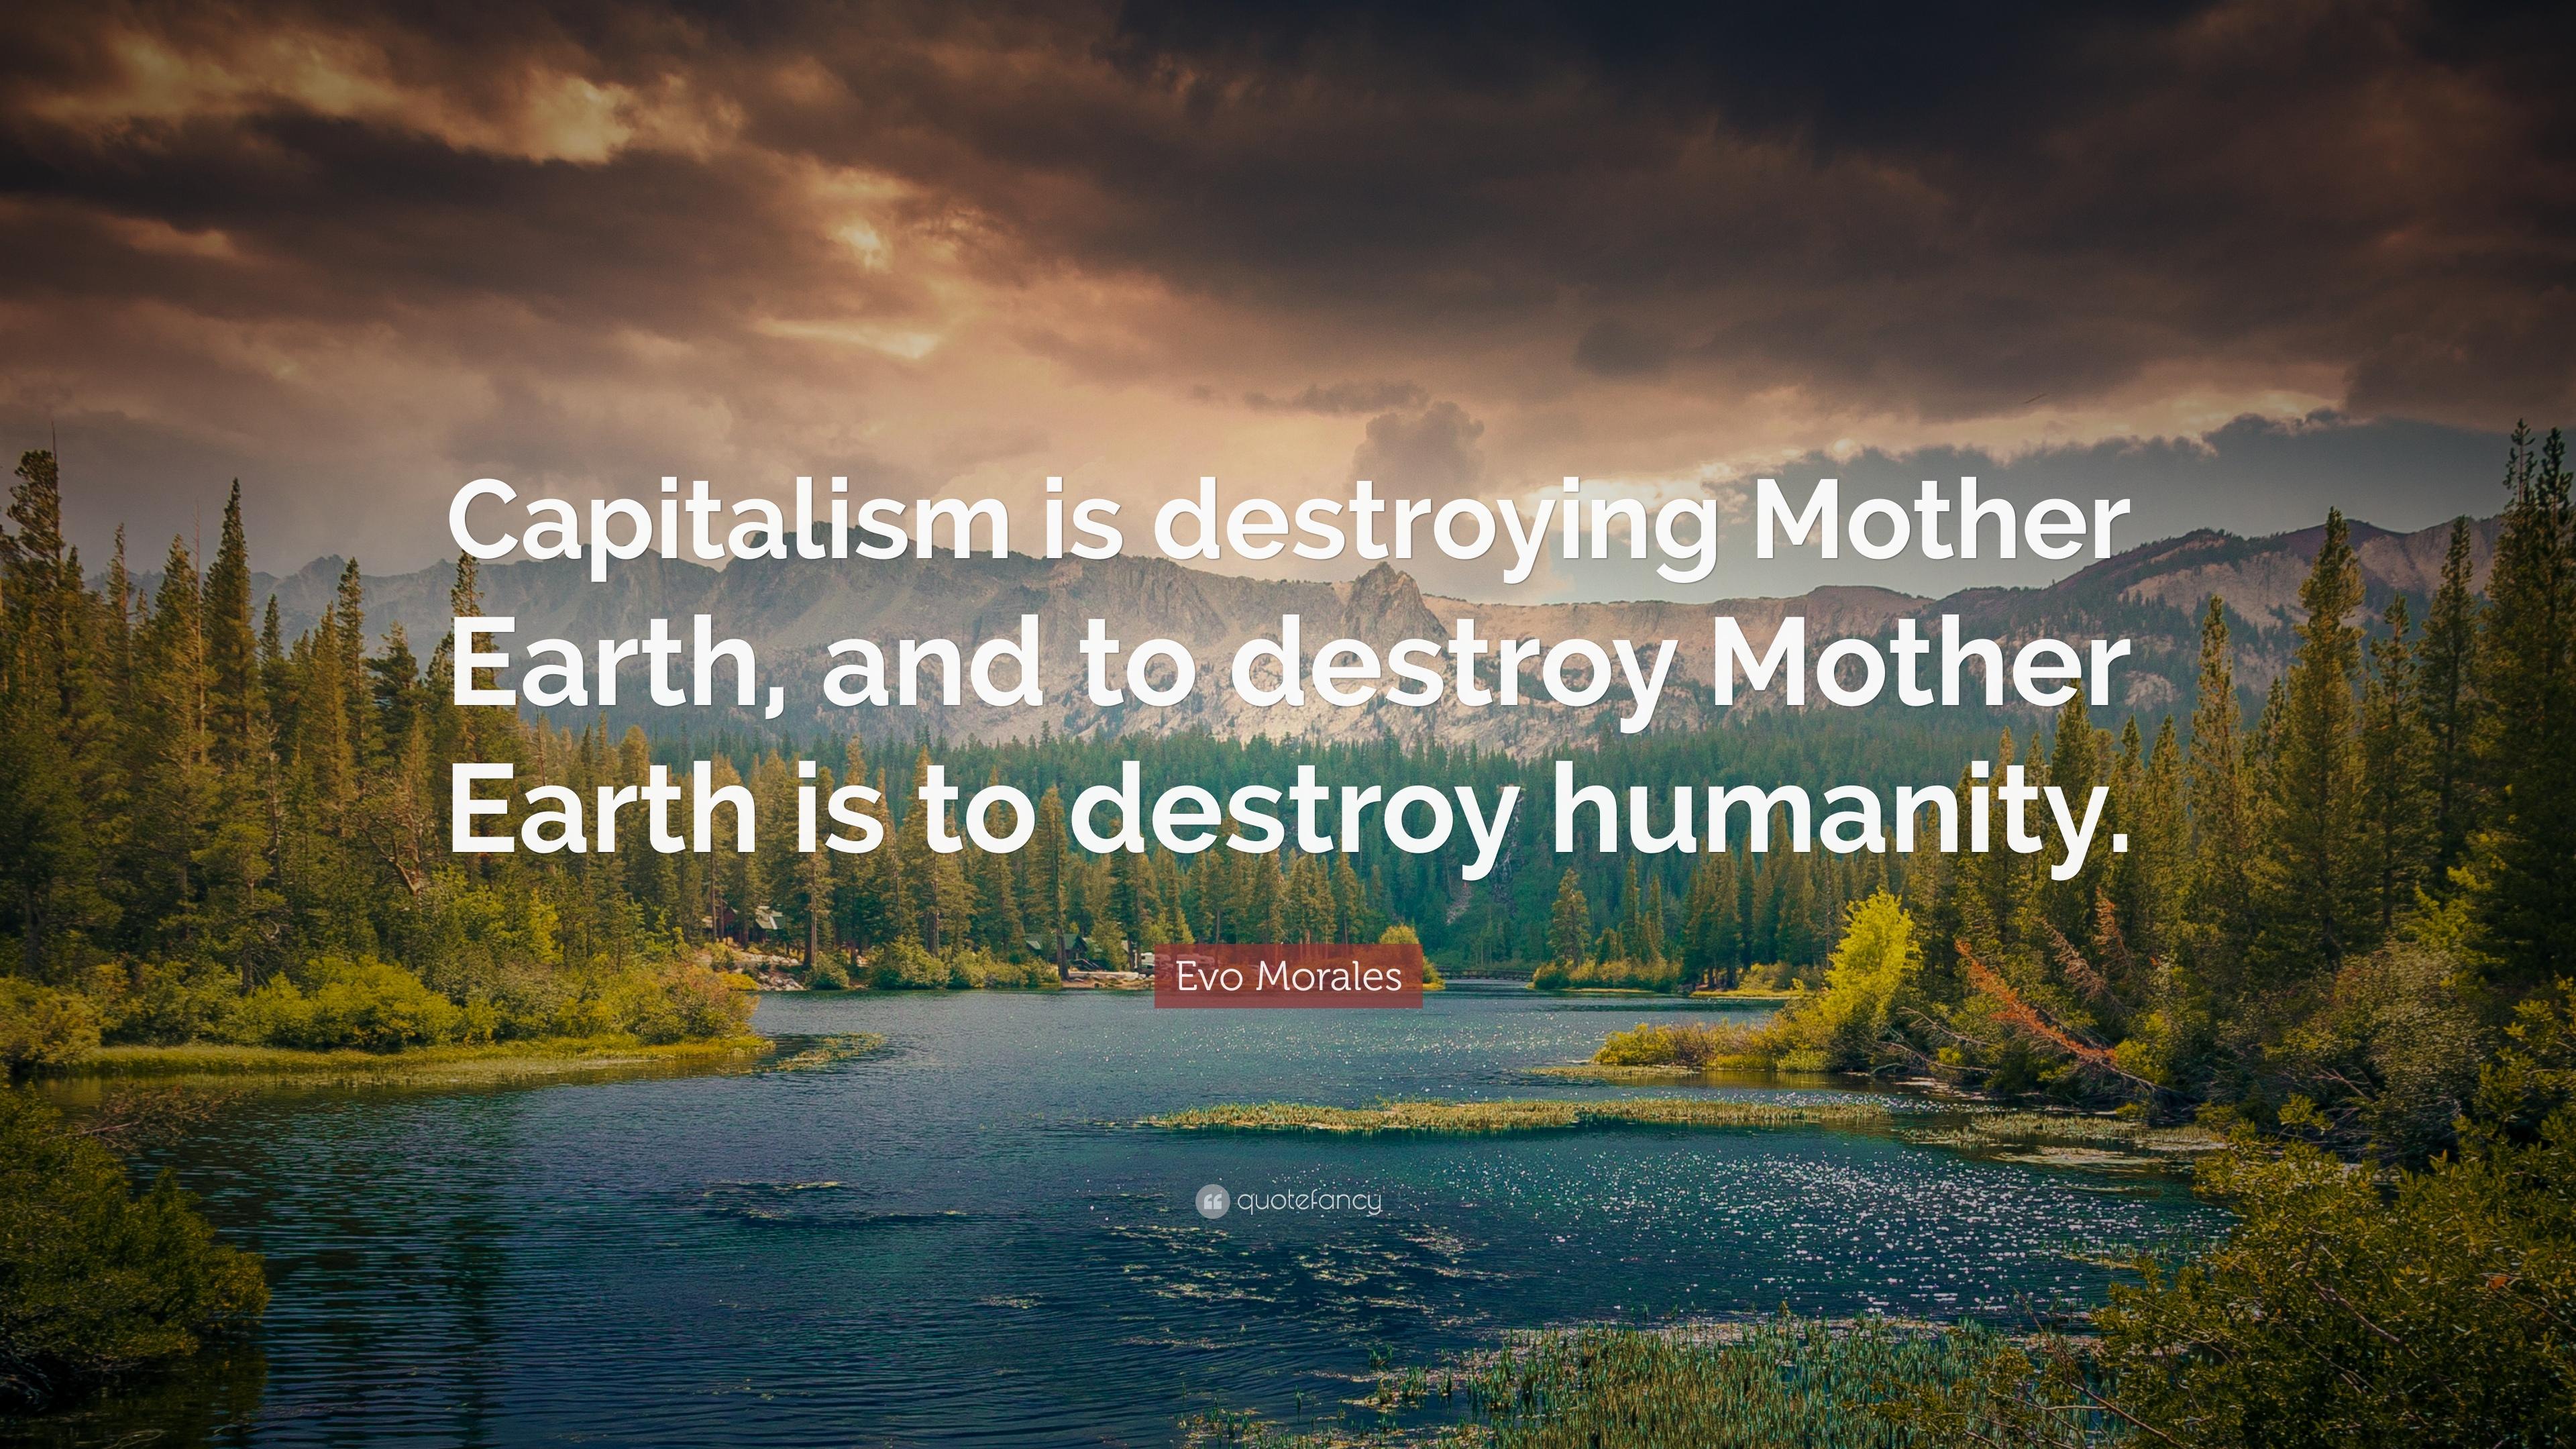 Evo Morales Quote: “Capitalism is destroying Mother Earth